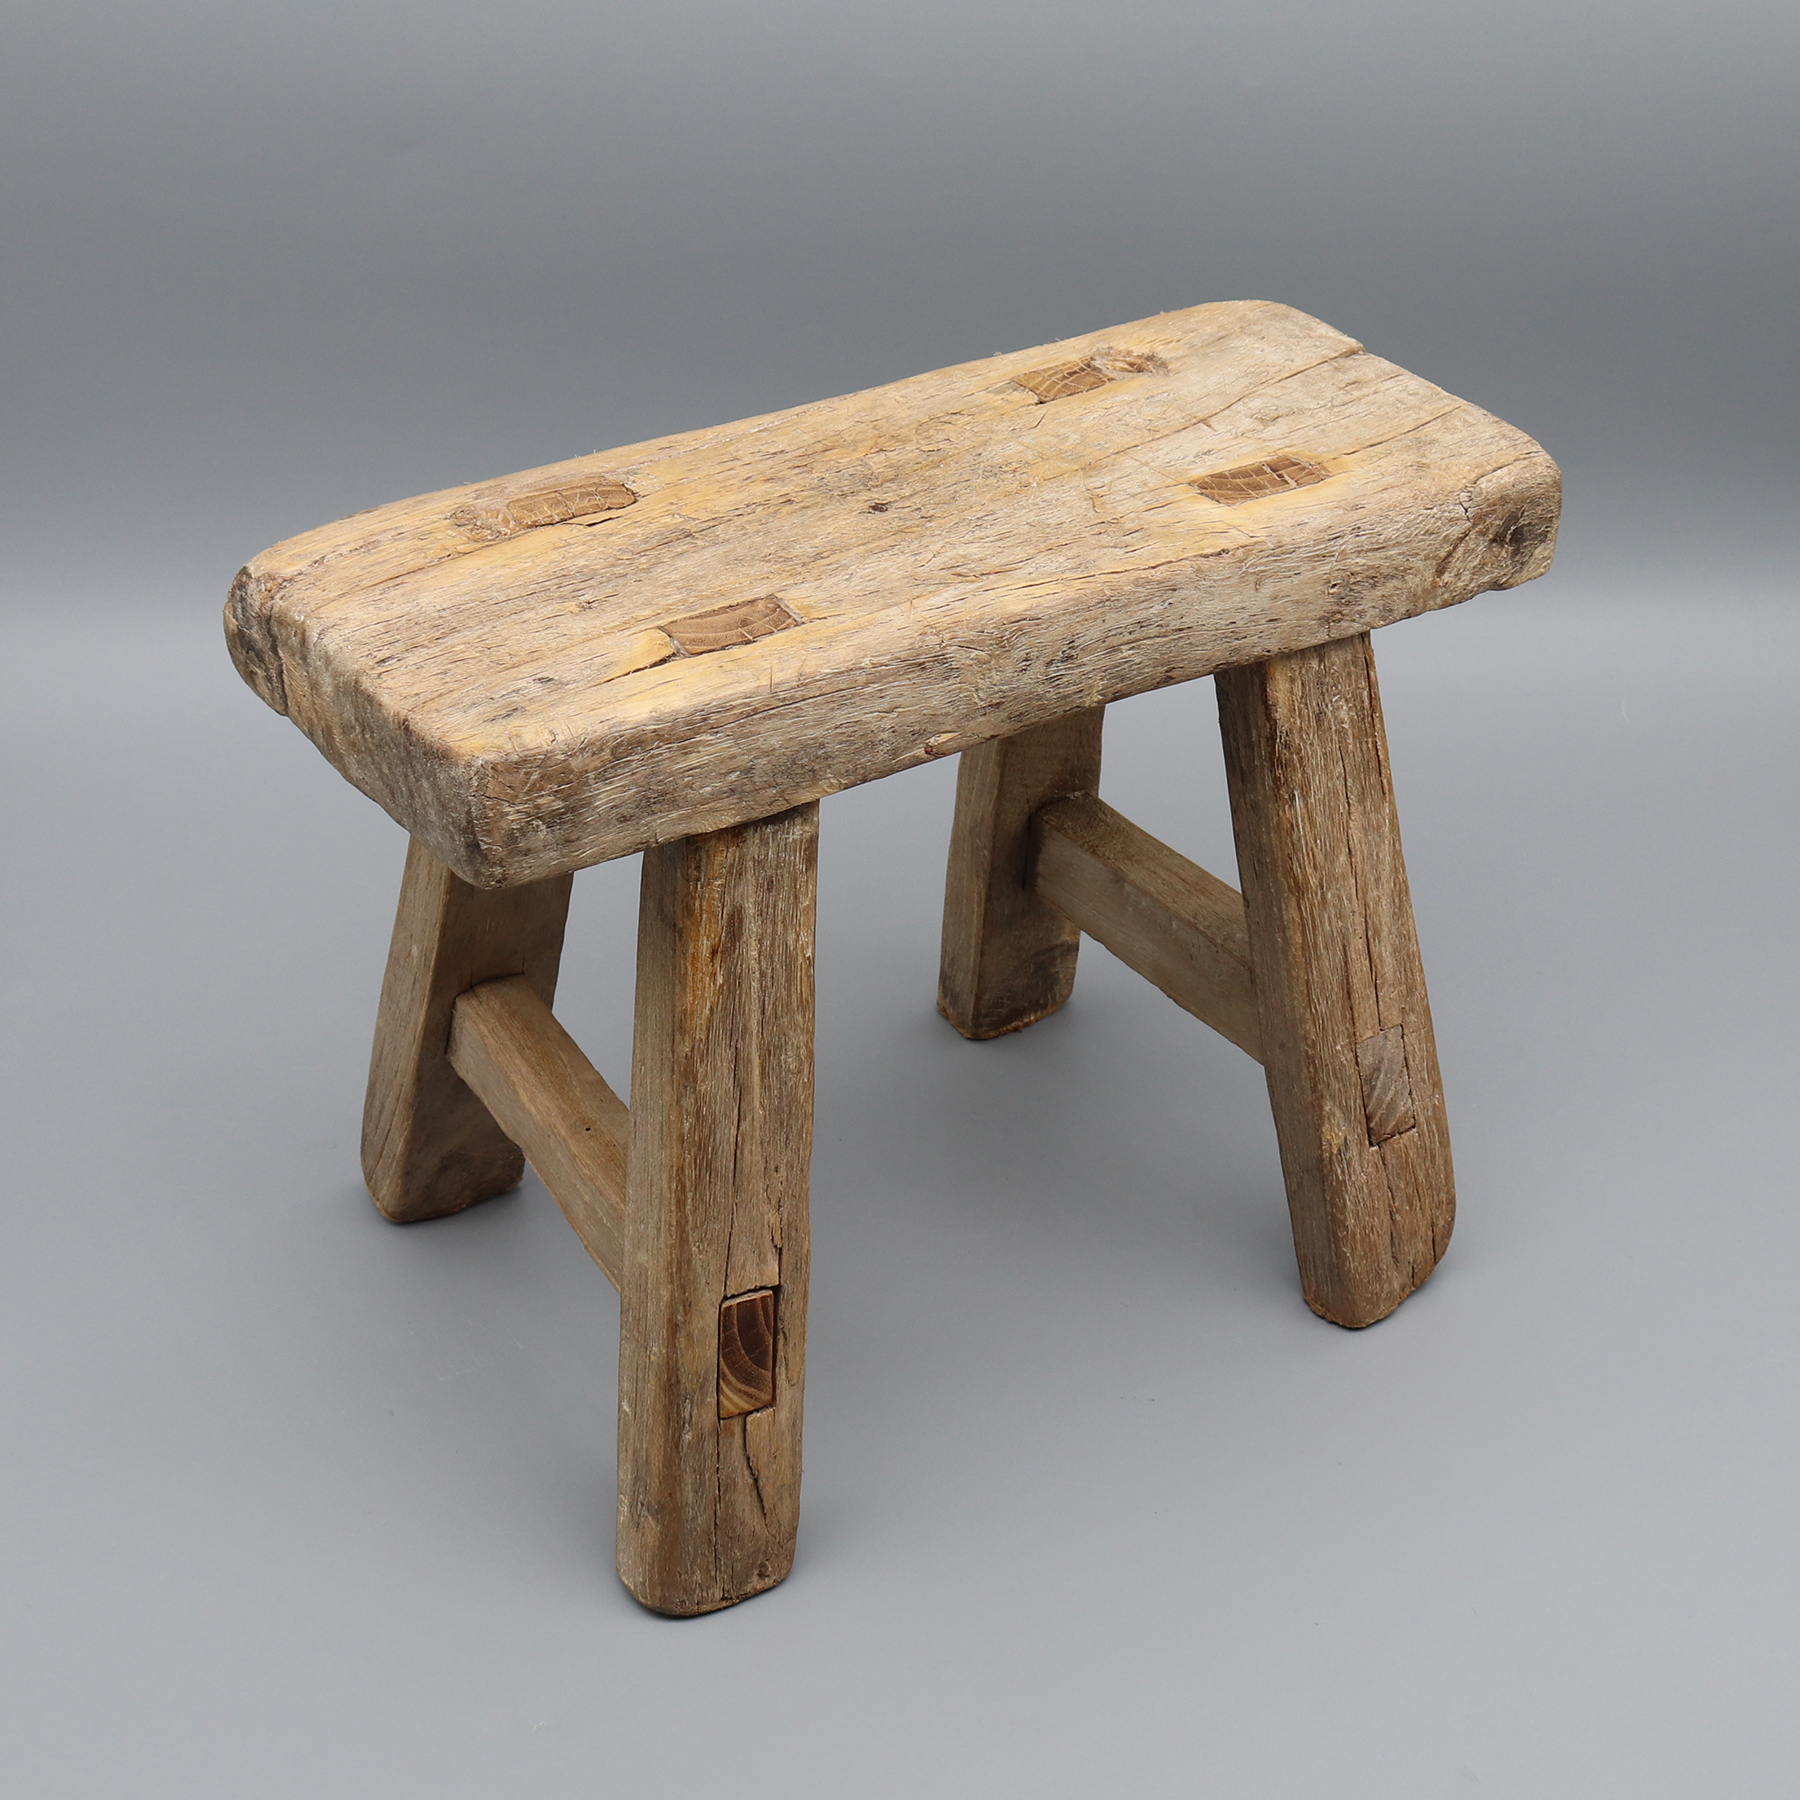 Antique Wooden Stool, Mortise and Tenon Jointed, Small Table, Plant Stand, Solid wood